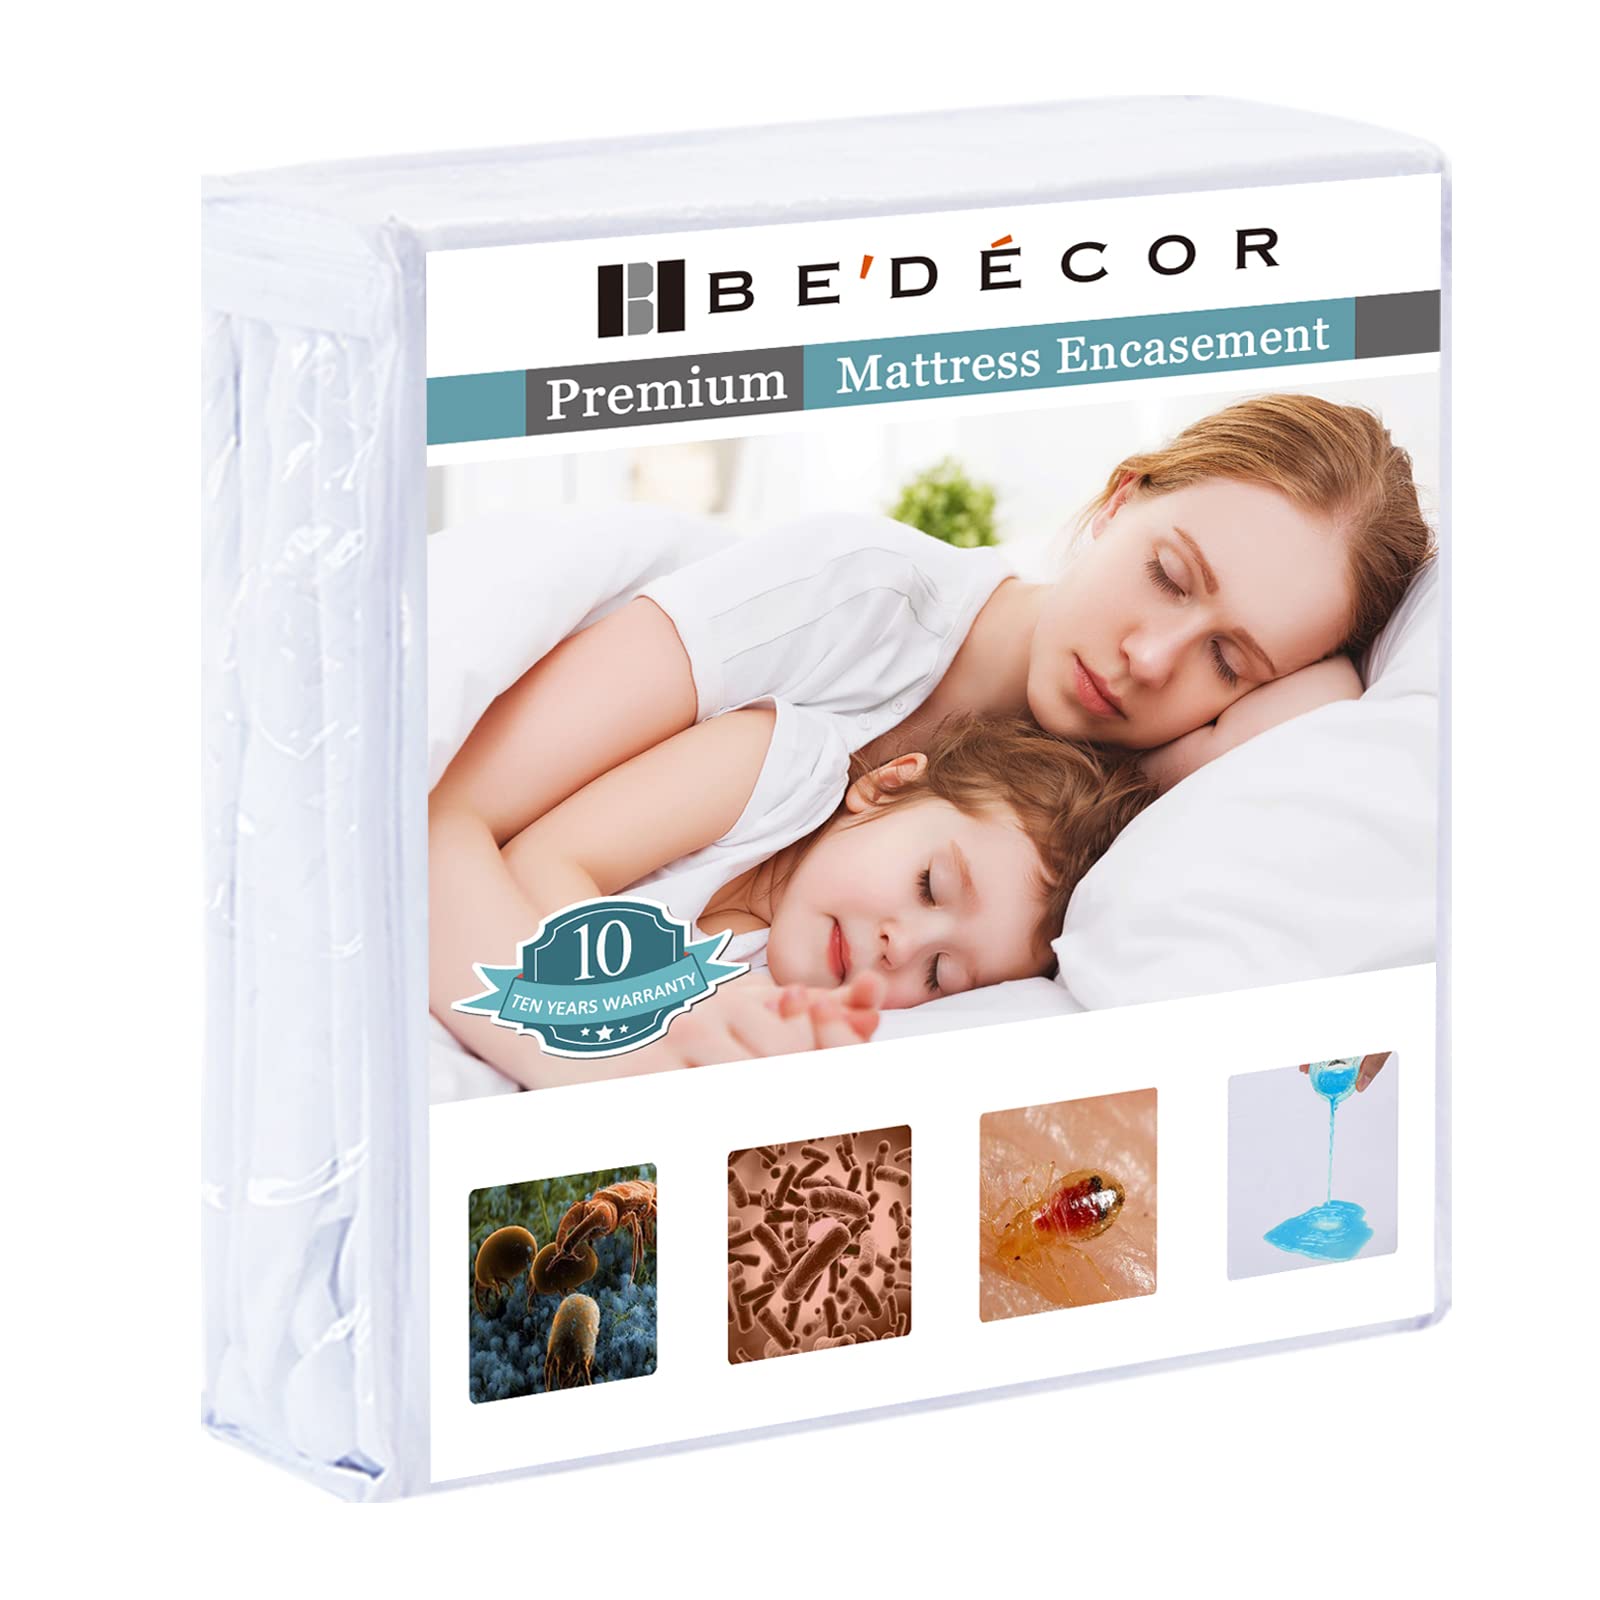 Book Cover Bedecor Zippered Mattress Encasement,6-Sided Waterproof Mattress Cover,Breathable Smooth,Mattress Protector Applicable to Home Hotel RV Hospital,Deep up to 9